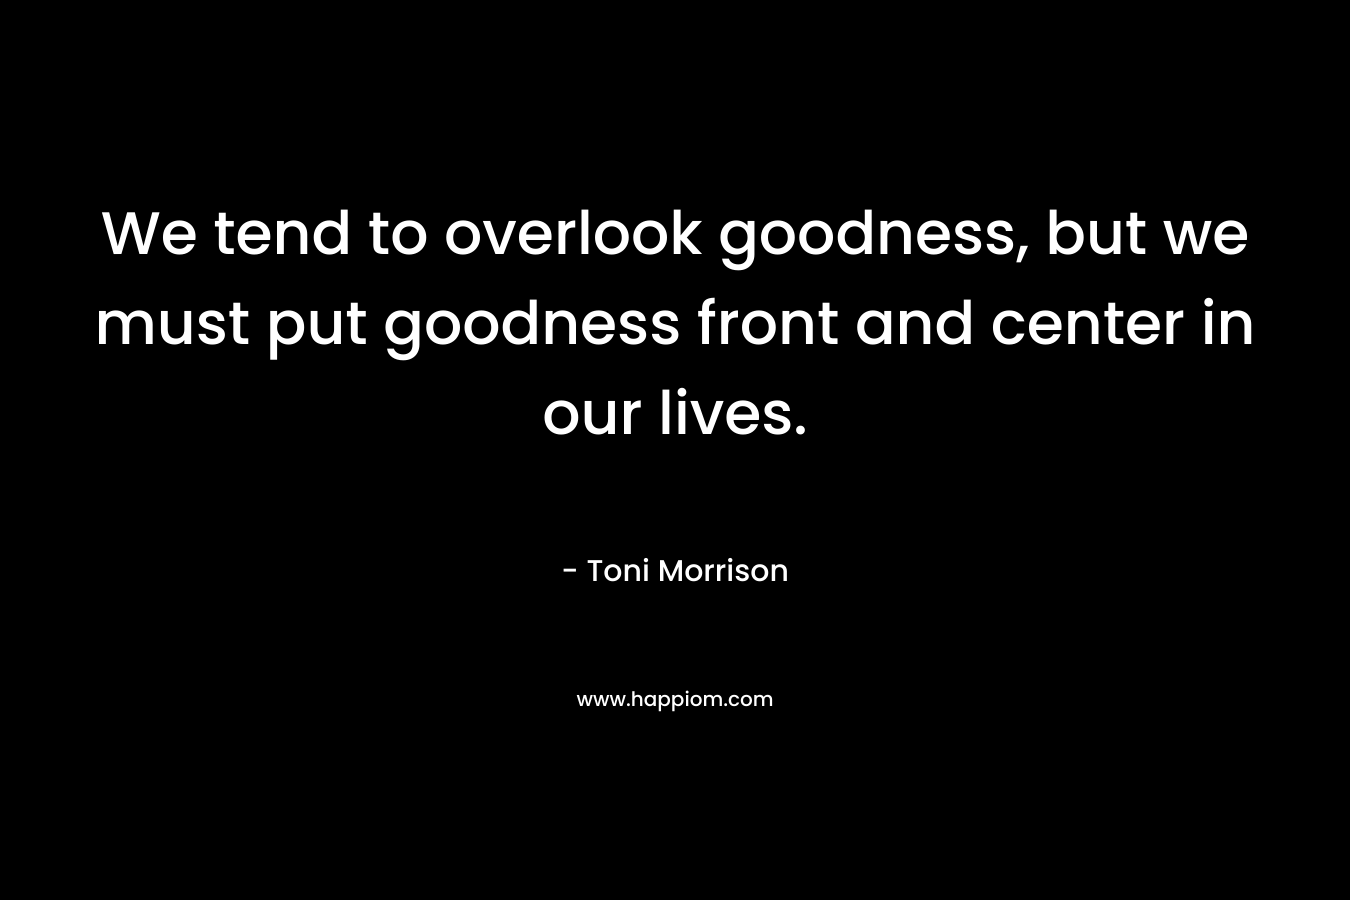 We tend to overlook goodness, but we must put goodness front and center in our lives. – Toni Morrison